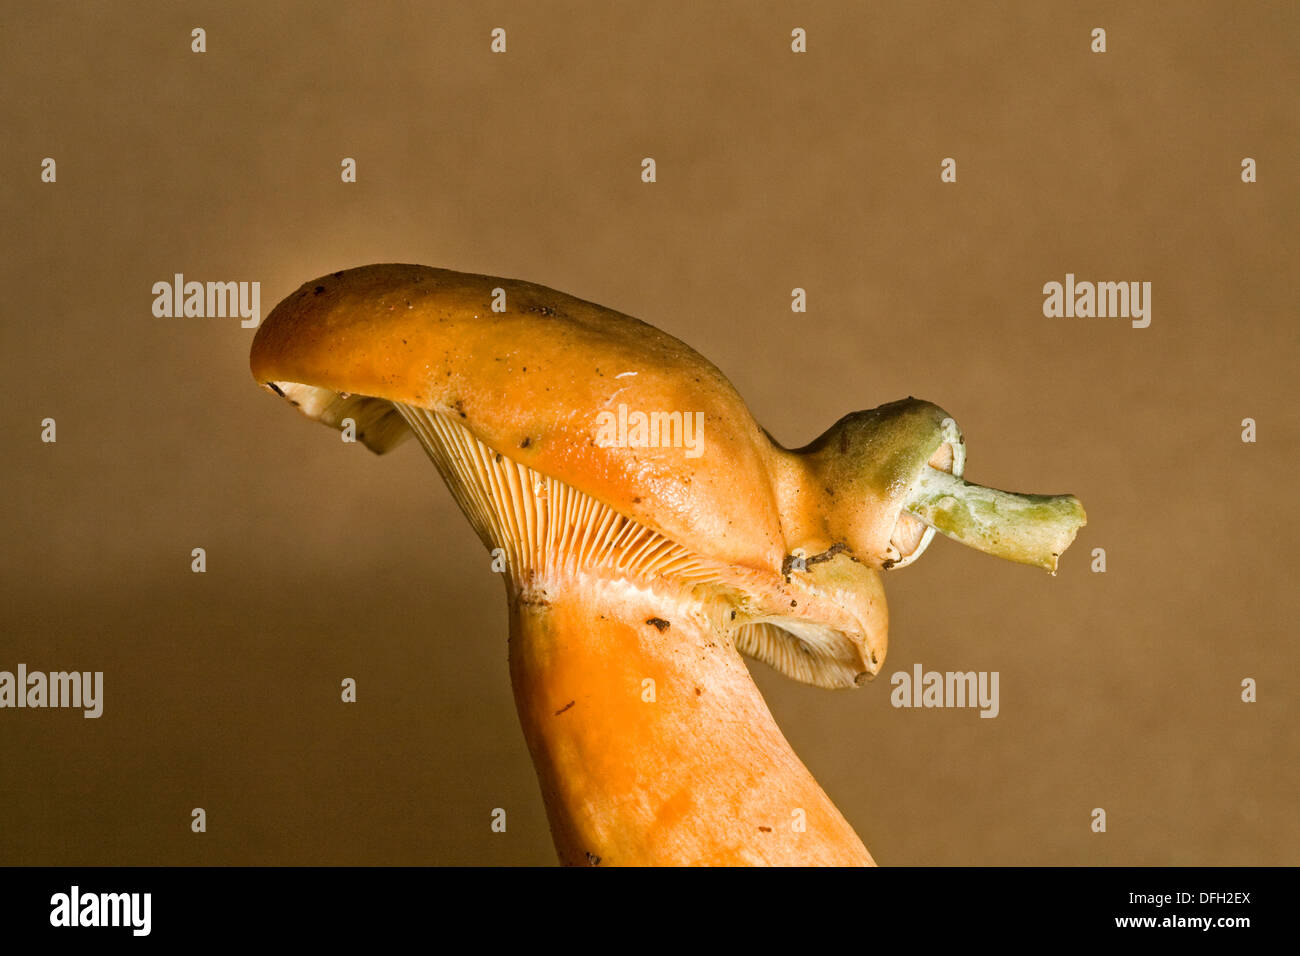 An example of Rosecomb Mutation on a wild mushroom, Lactarius salmonicolor., The smaller mushroom growing from its cap is the mutation. Stock Photo